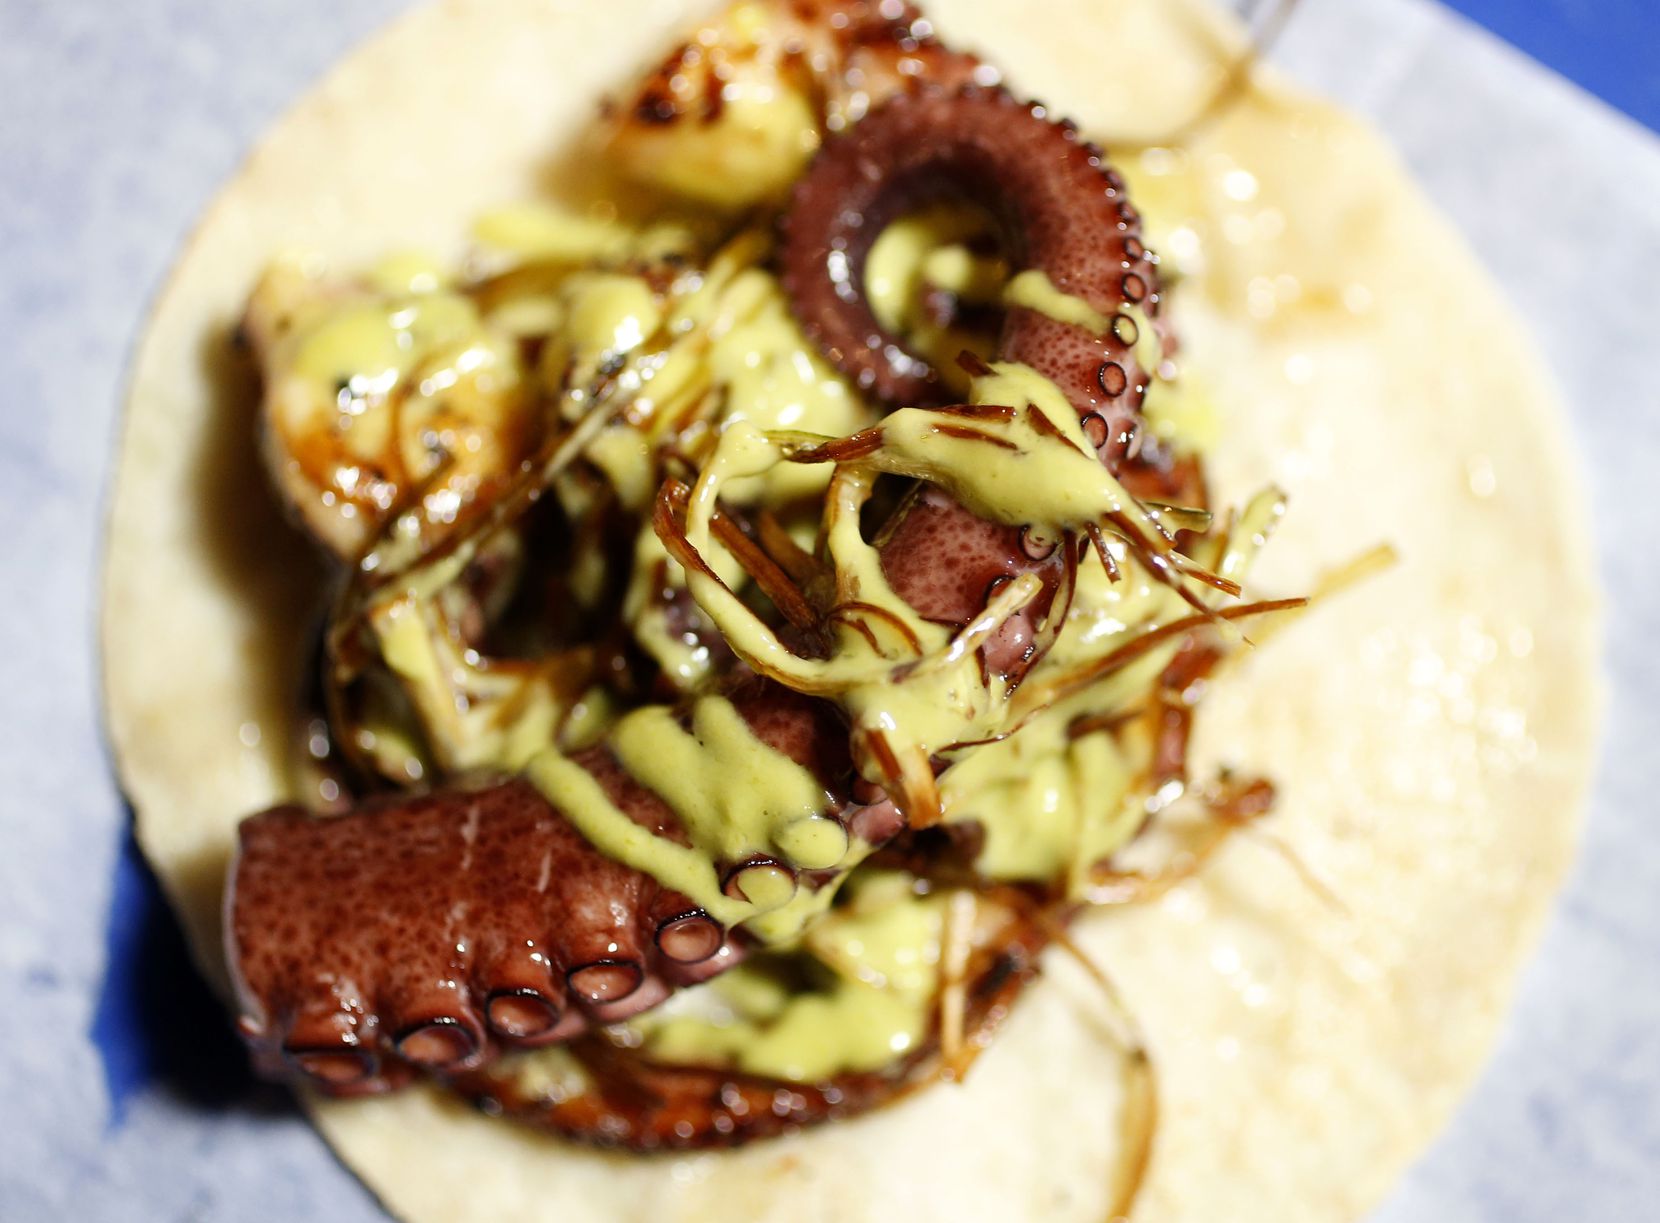 One of the popular dishes at Revolver Taco Lounge in Deep Ellum is the pulpo (octopus) taco....